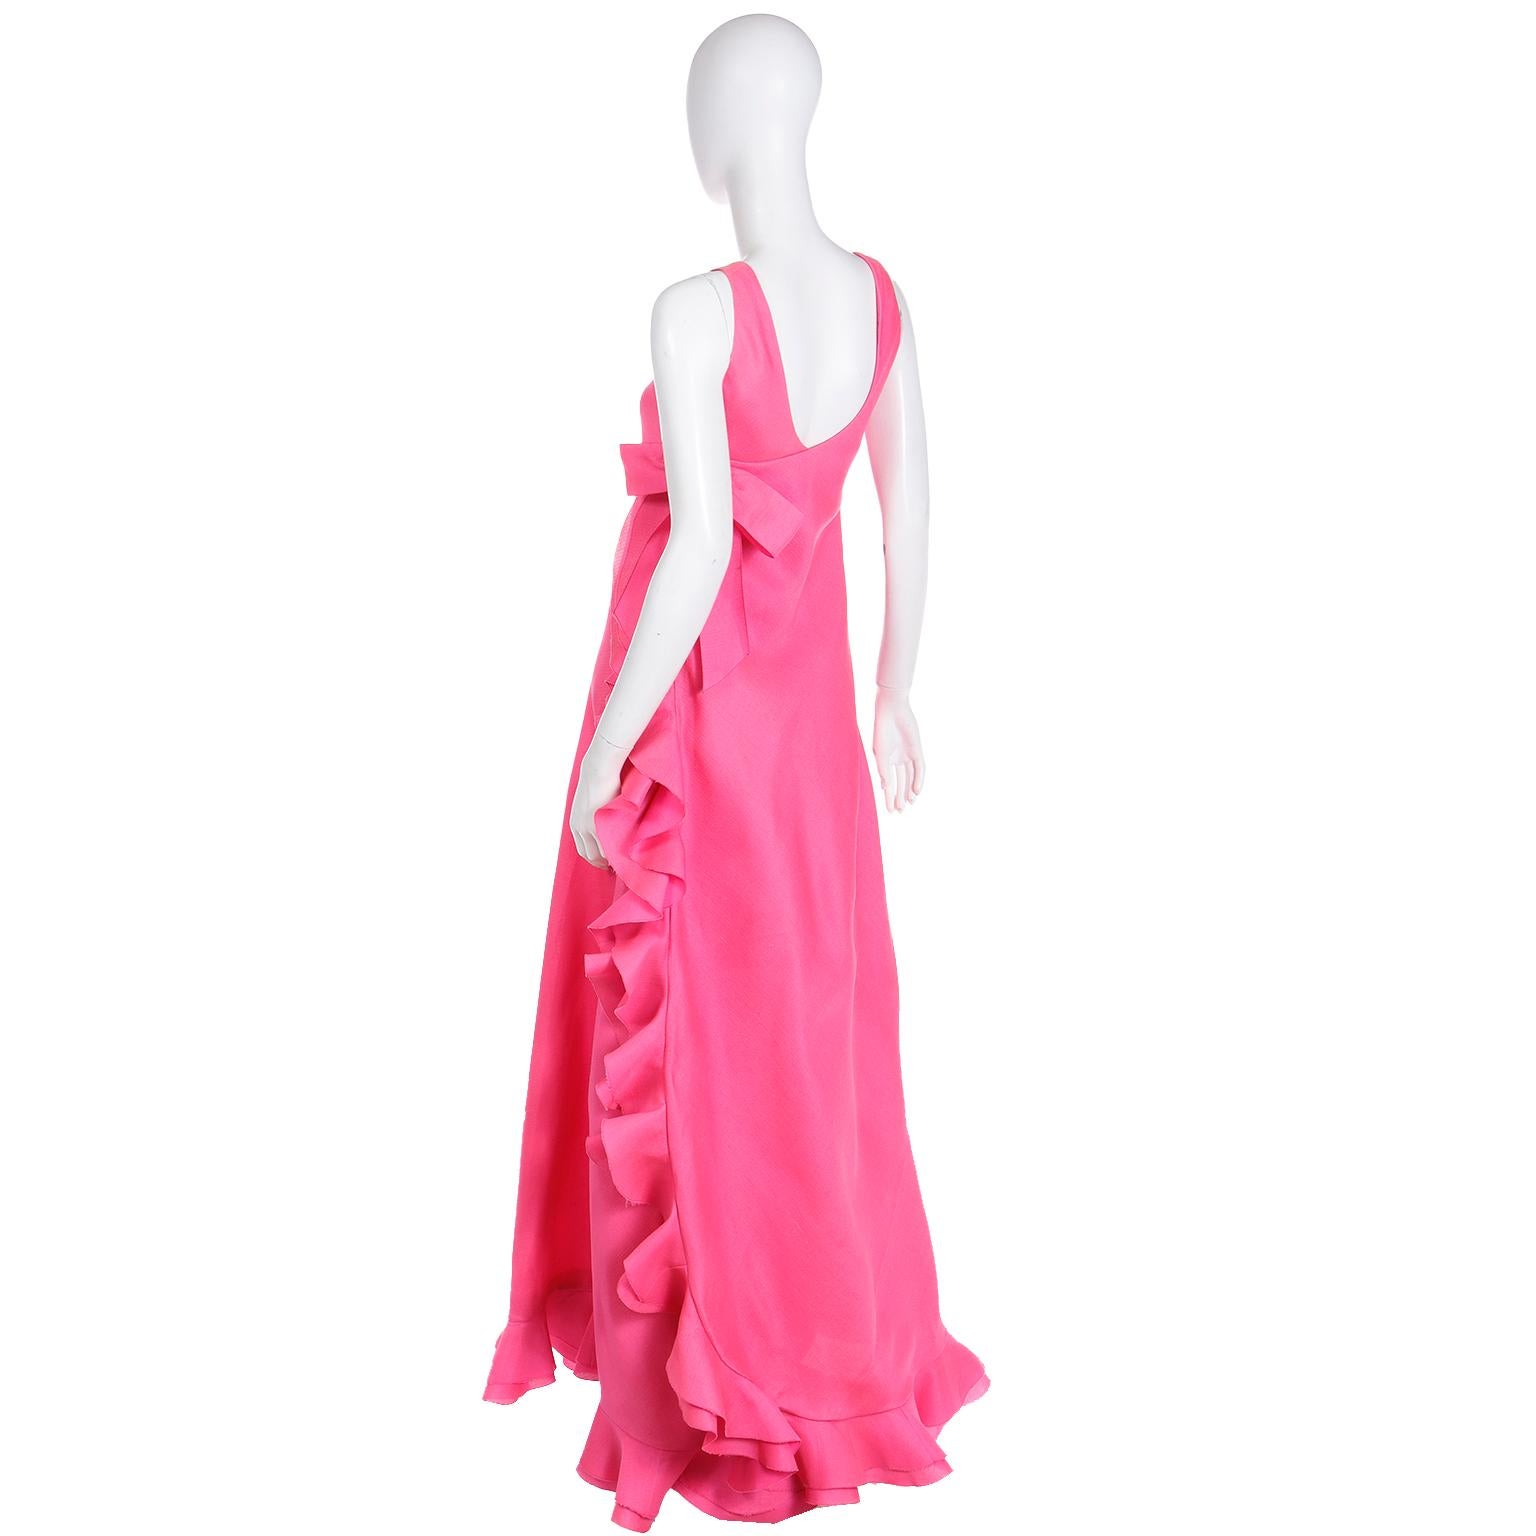 1971 Christian Dior Haute Couture Pink Ruffled Runway Evening Dress Grace Kelly  For Sale 9